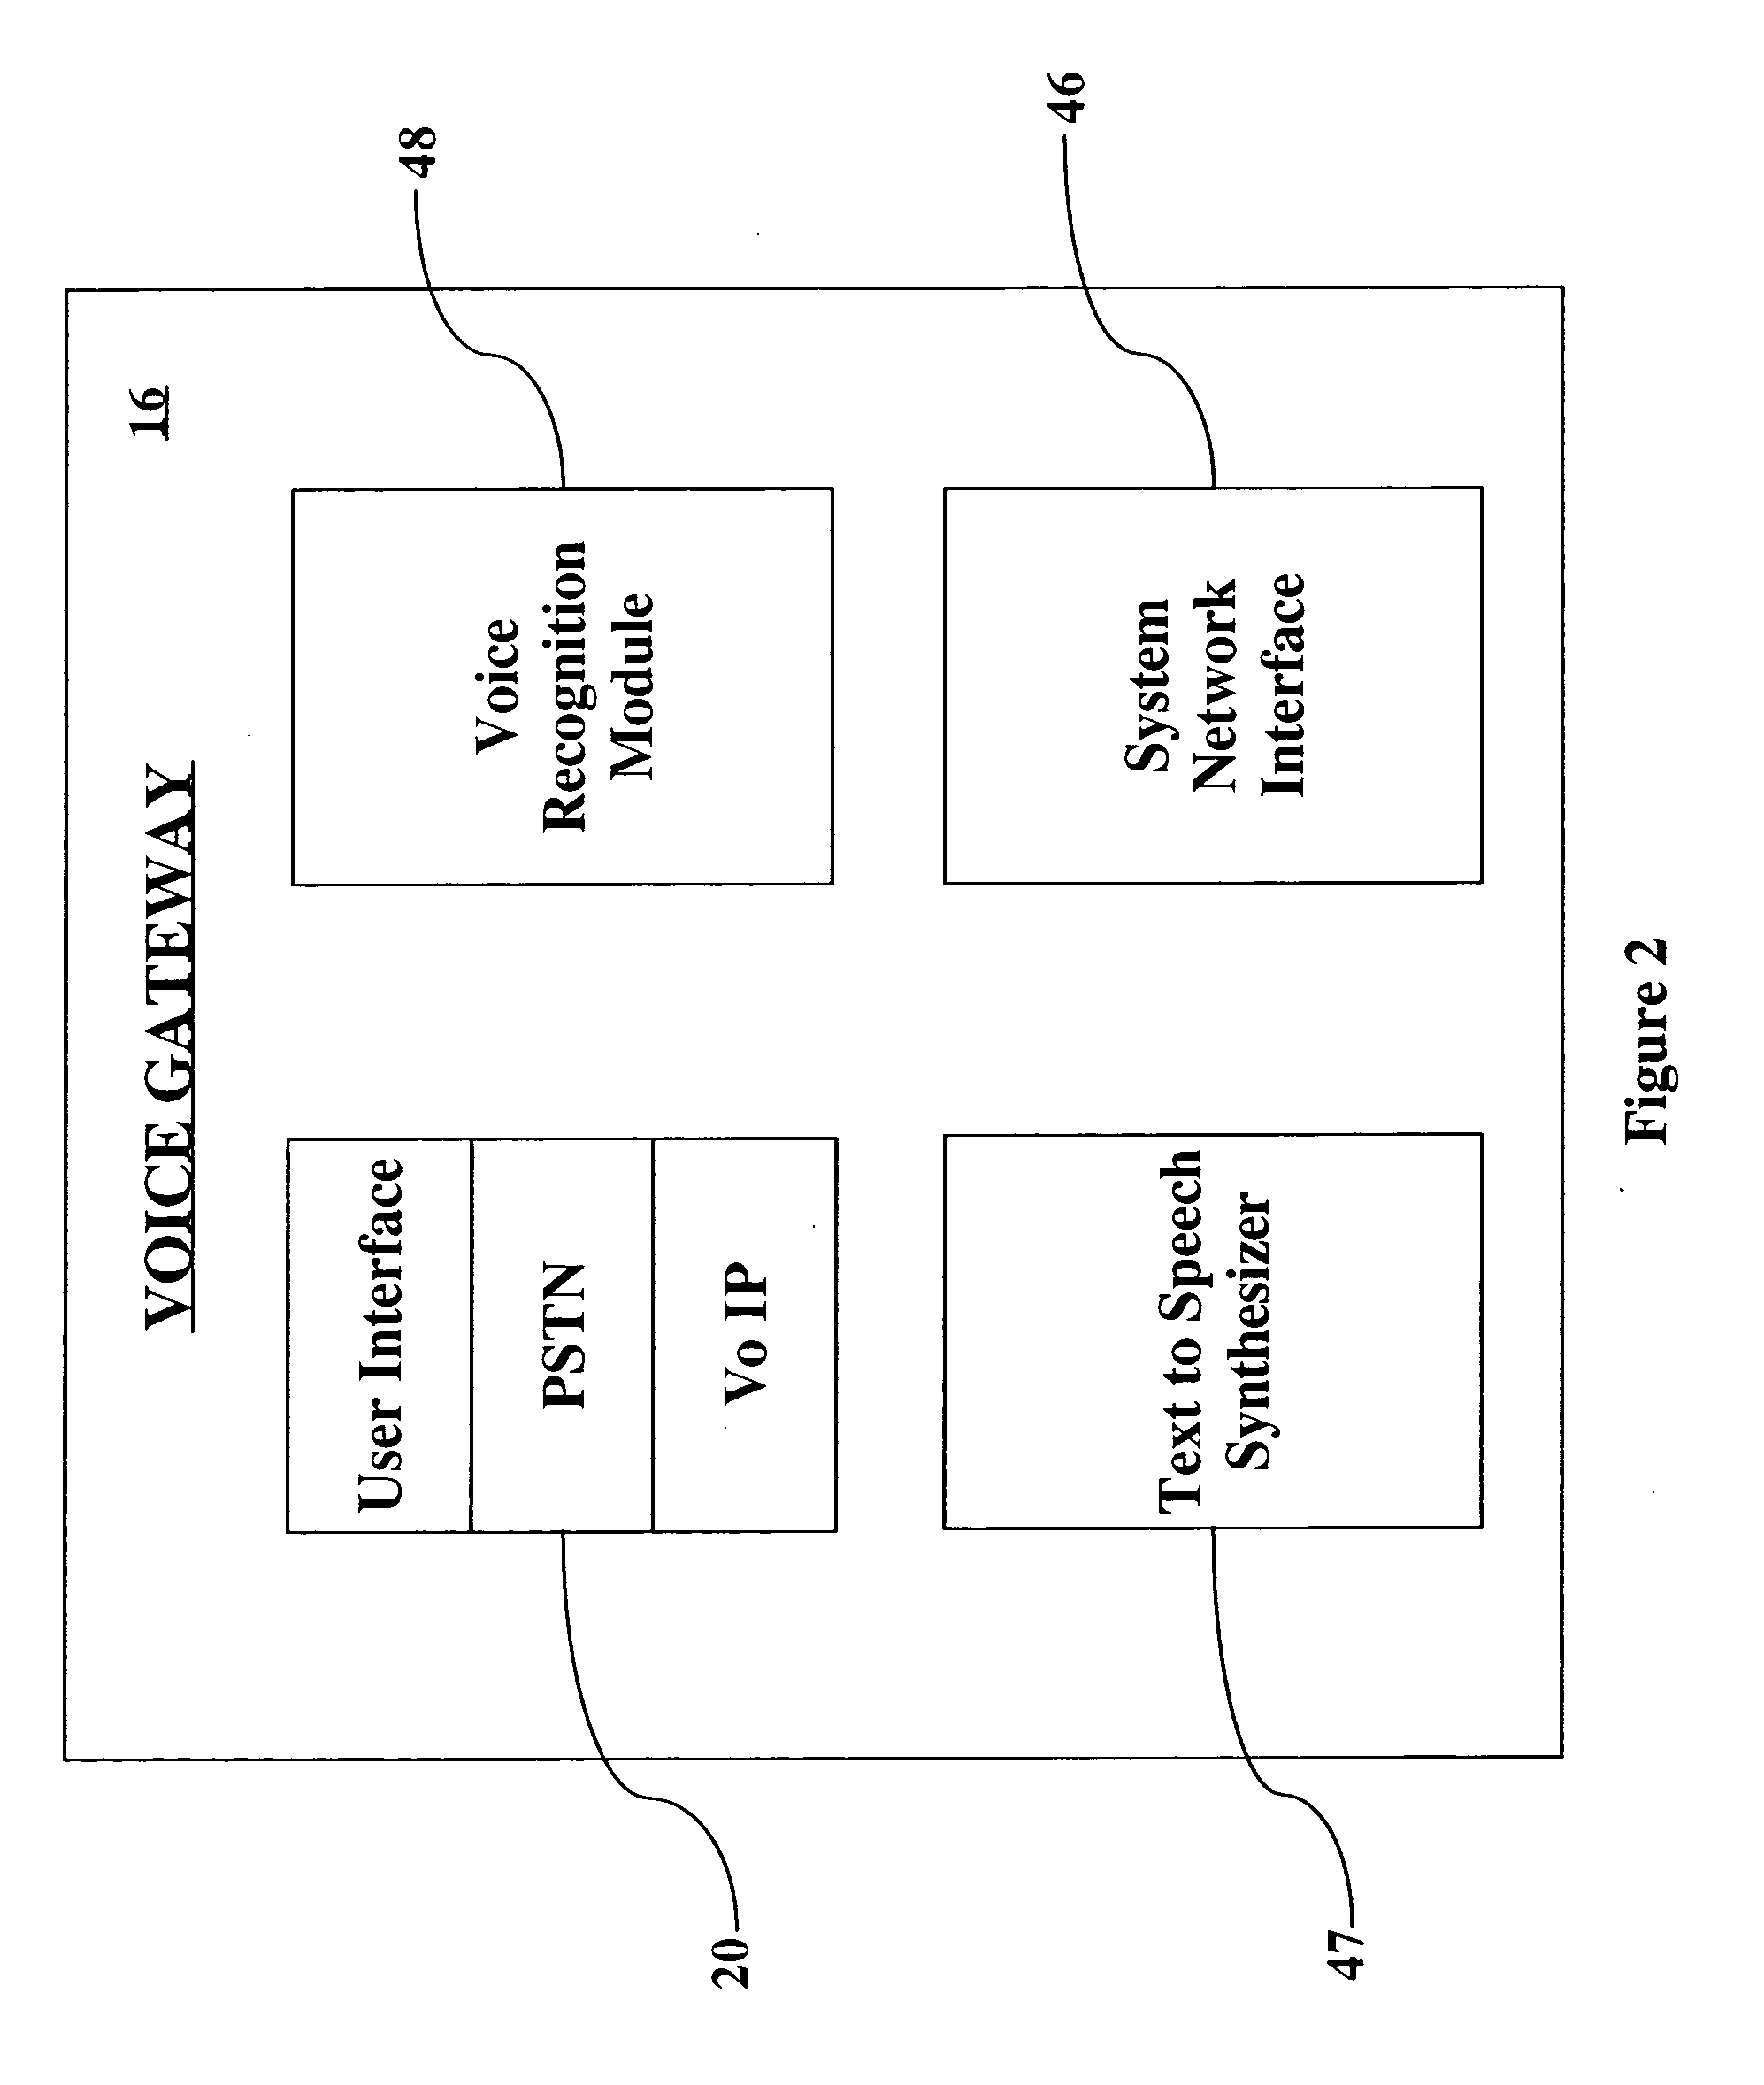 Method and system for processing knowledge